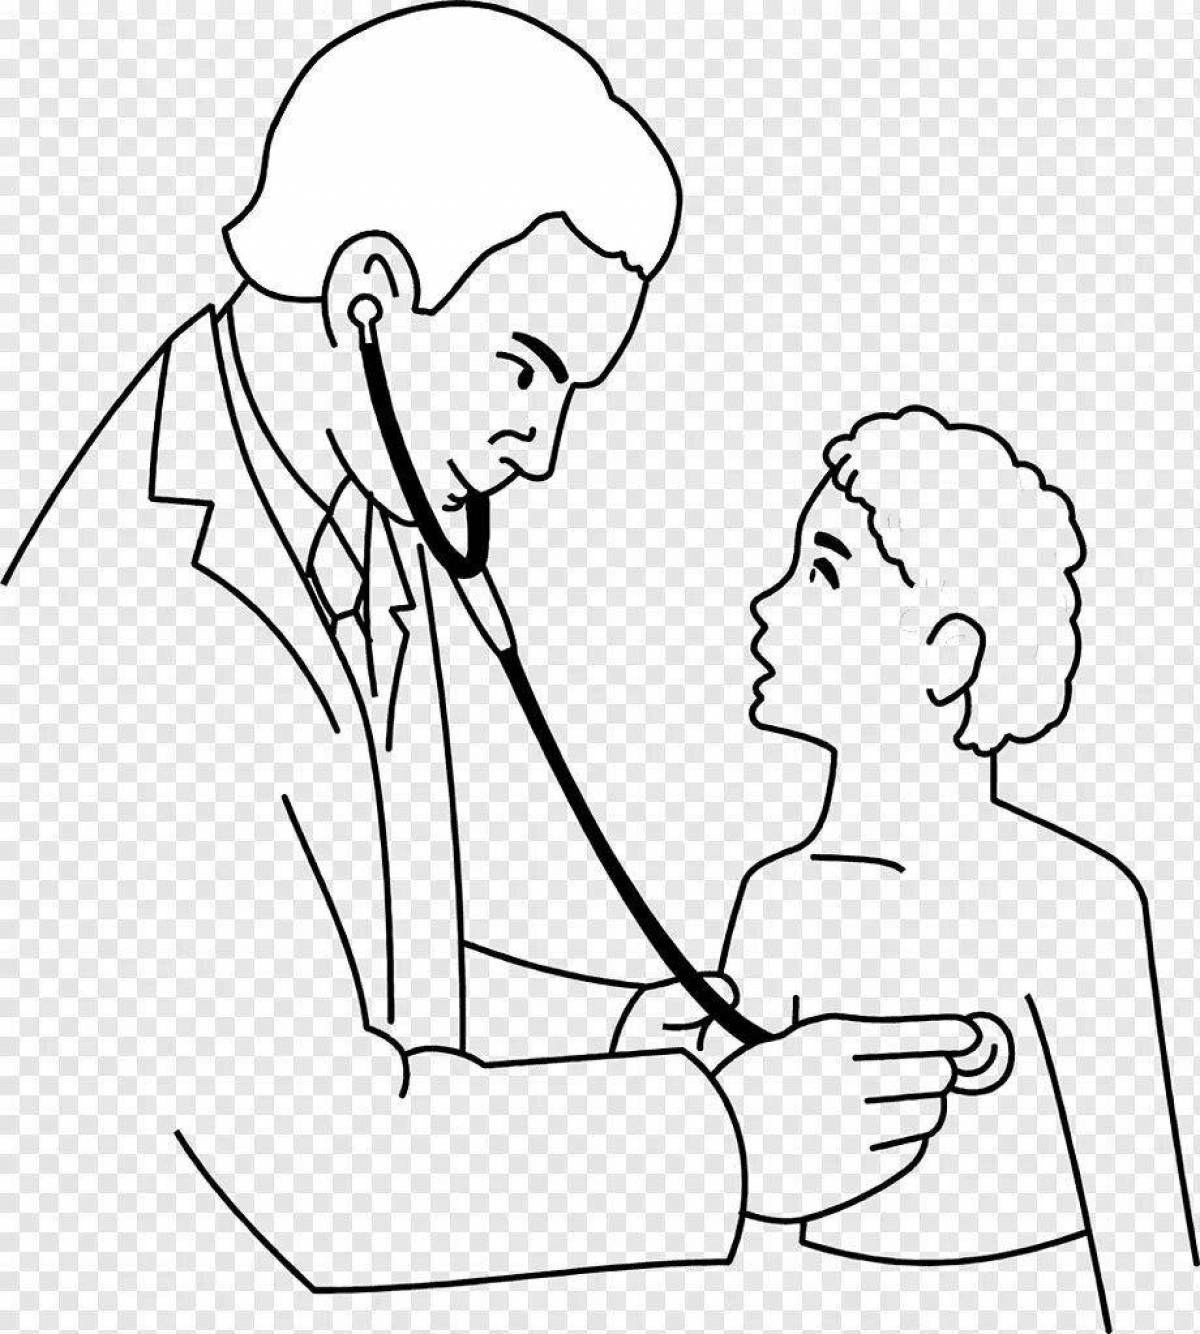 Amazing surgeon coloring page for kids